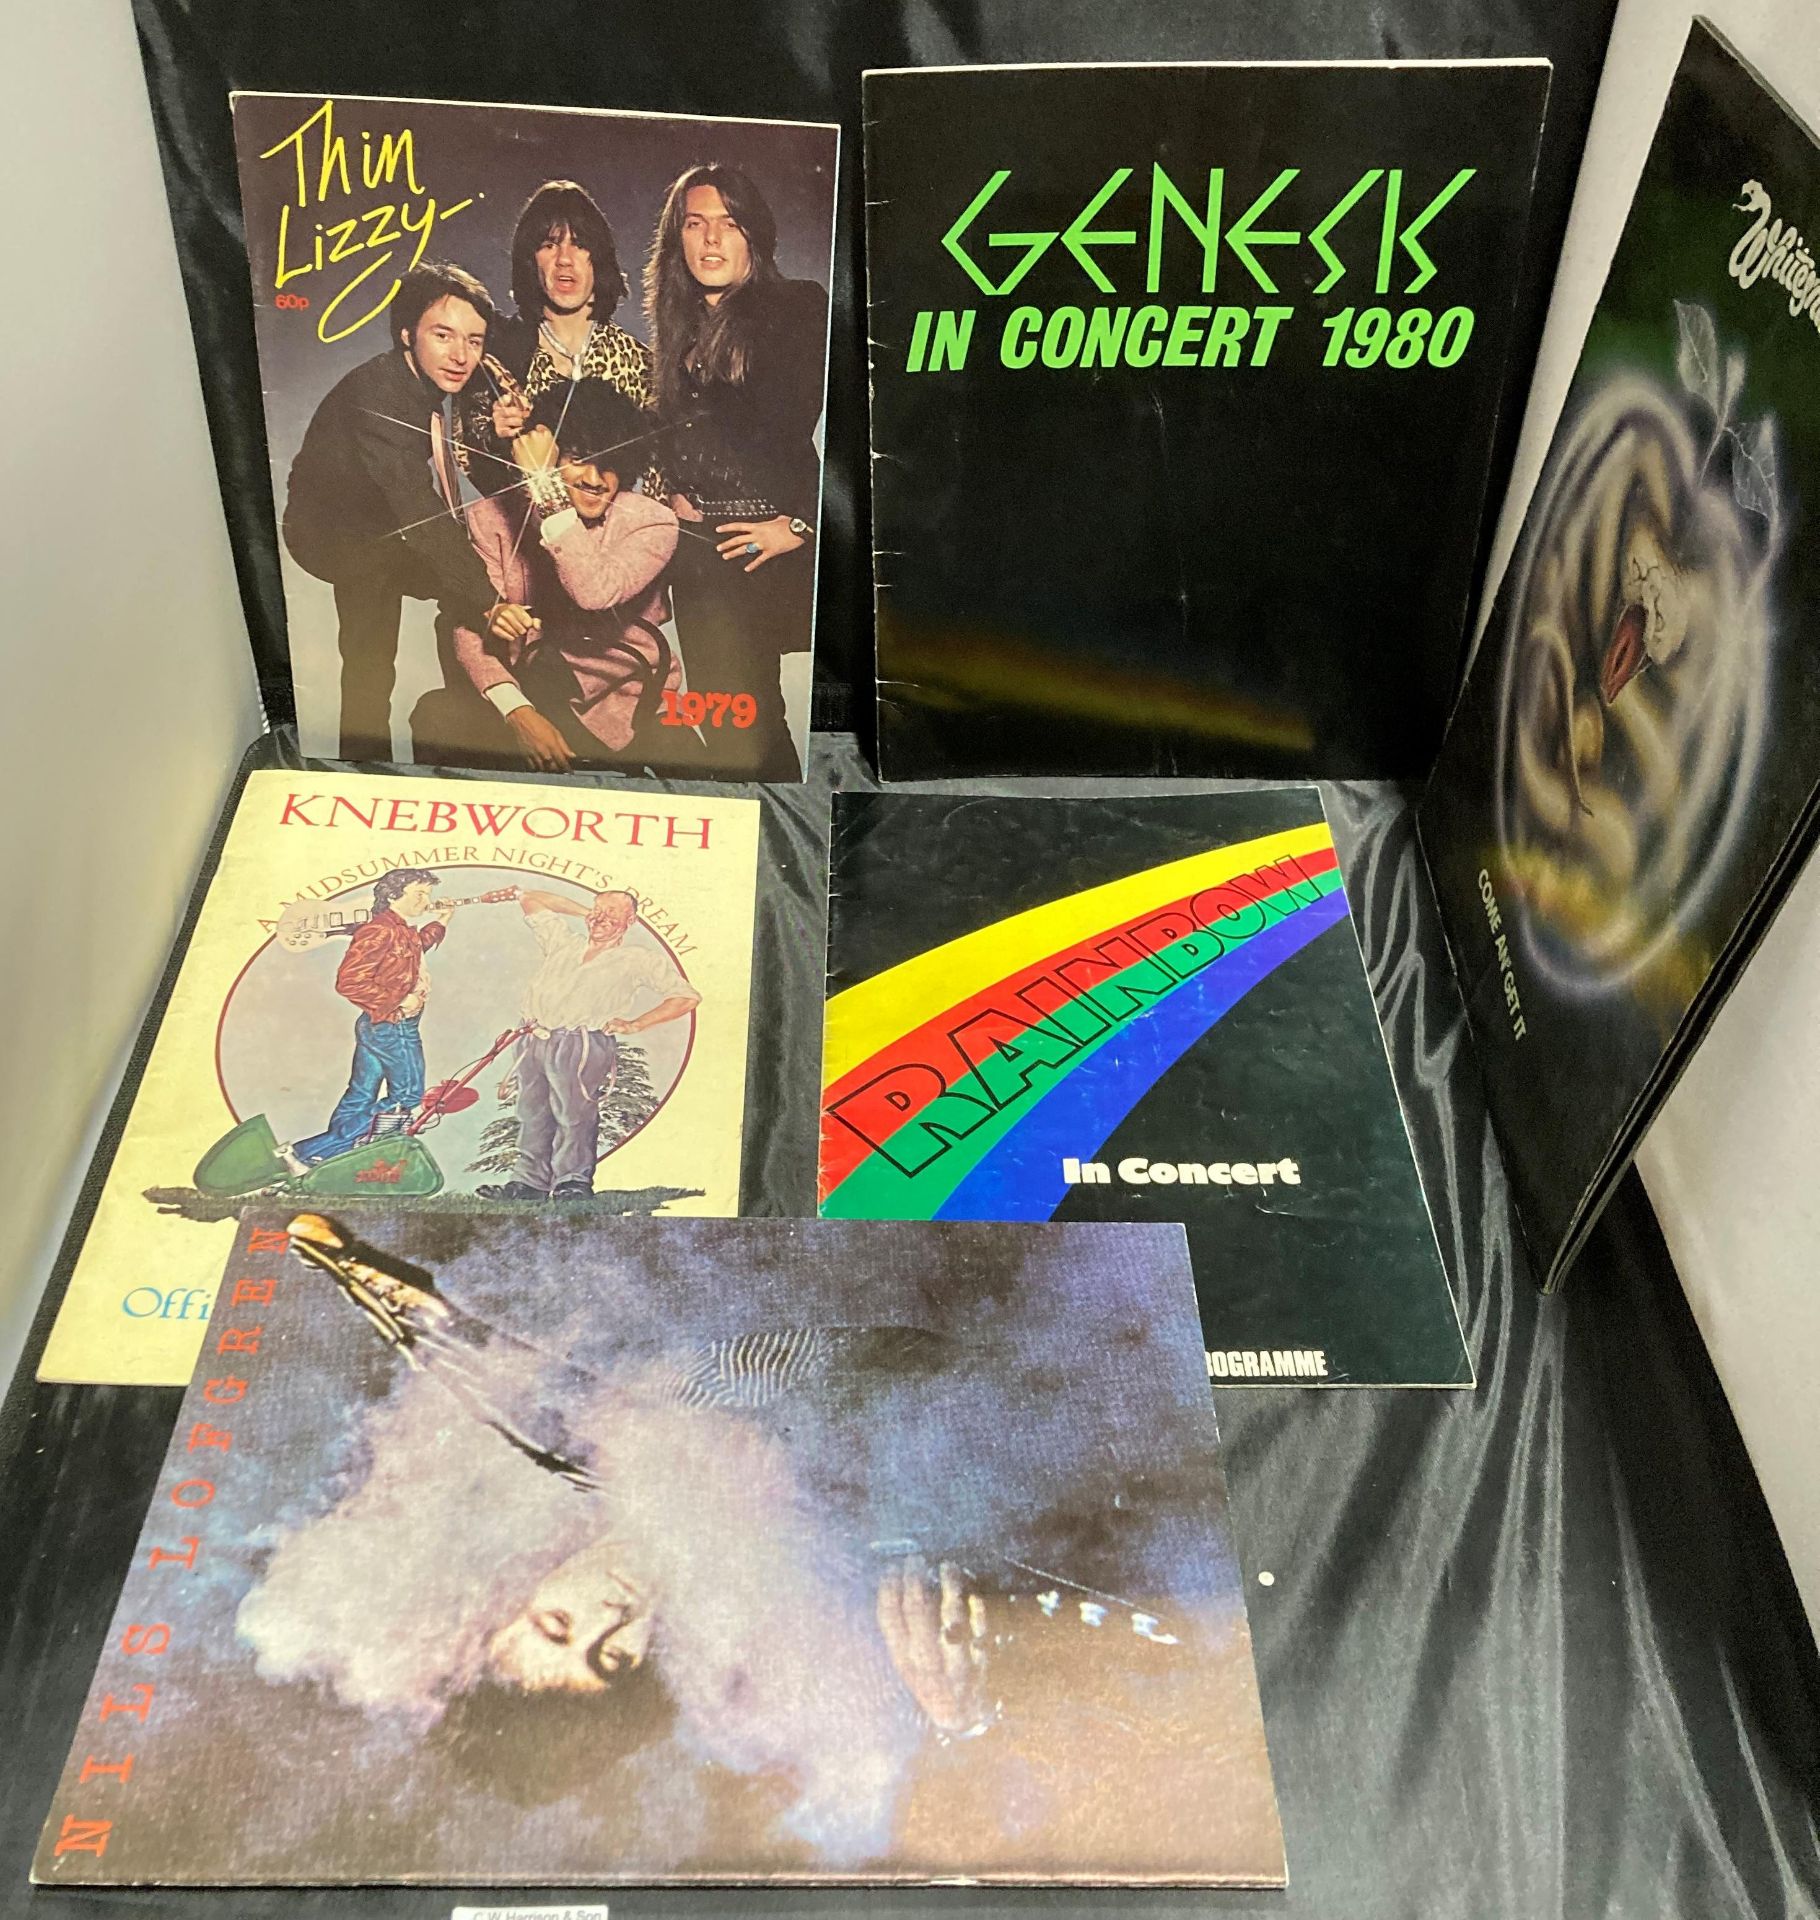 Contents to tray - approx 30 rock concert programmes mainly 1970s but featuring Ten Years After